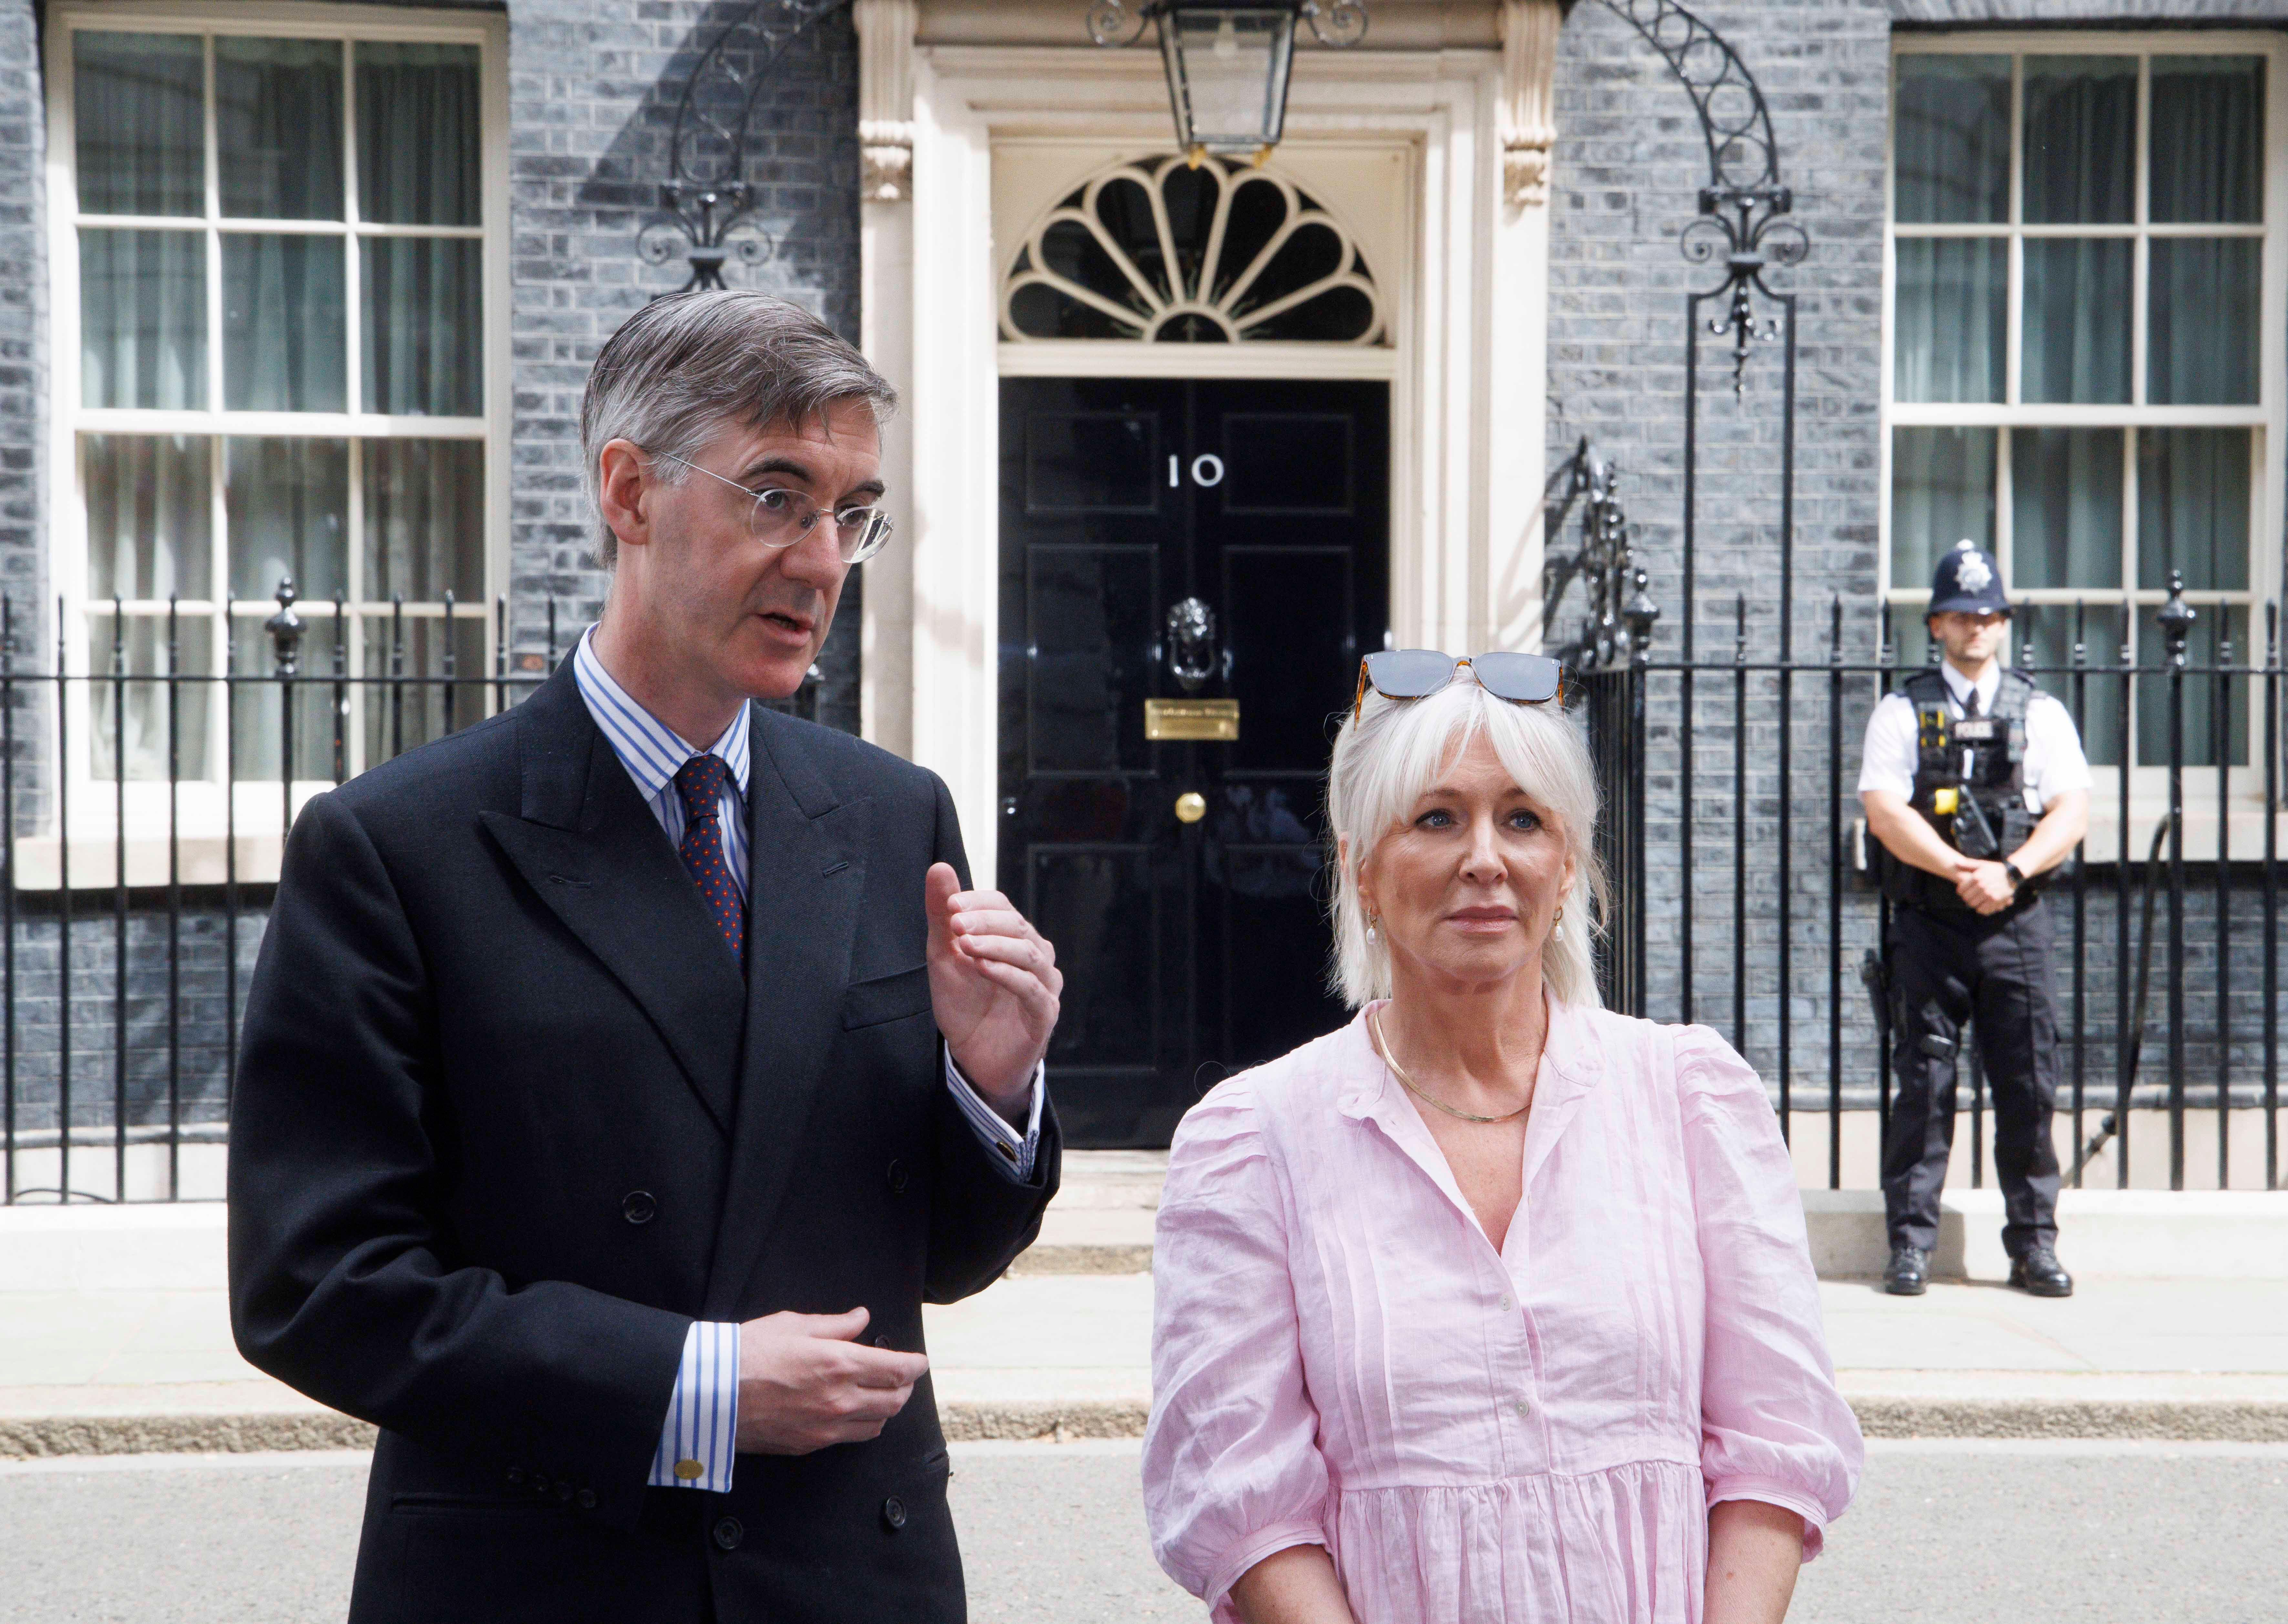 Jacob Rees-Mogg was criticised Nadine Dorries for his ‘Dickensian’ push to make Whitehall staff return to the office (Karl Black/Alamy Live News/PA)